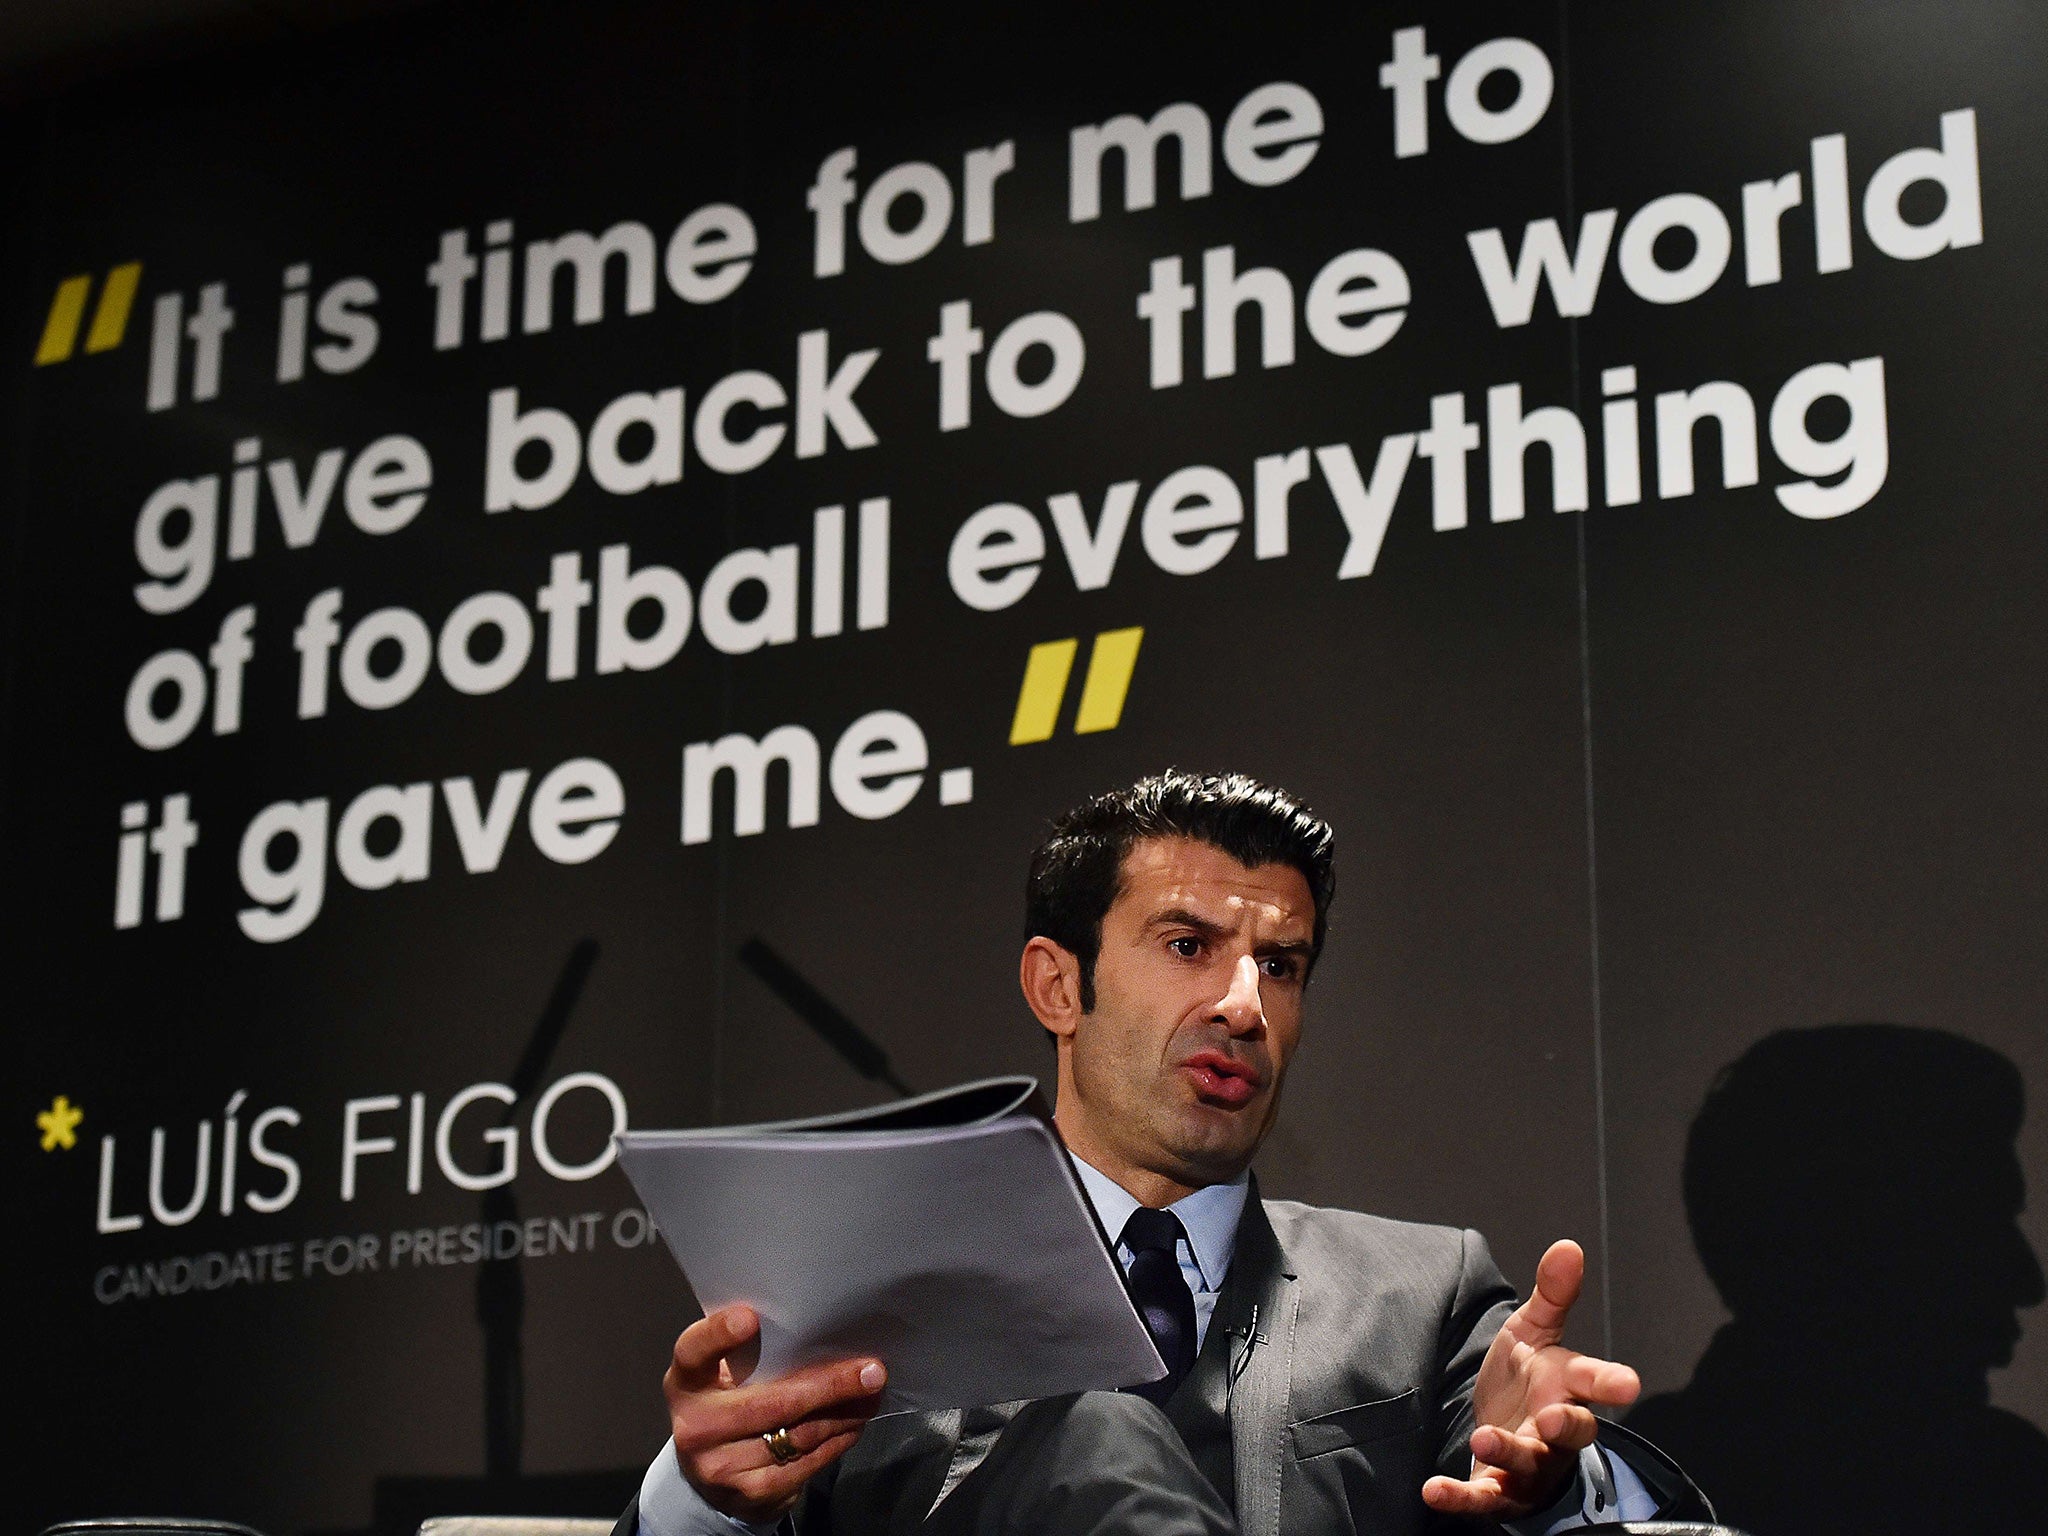 Luis Figo is one of Sepp Blatter’s three opponents in the May election